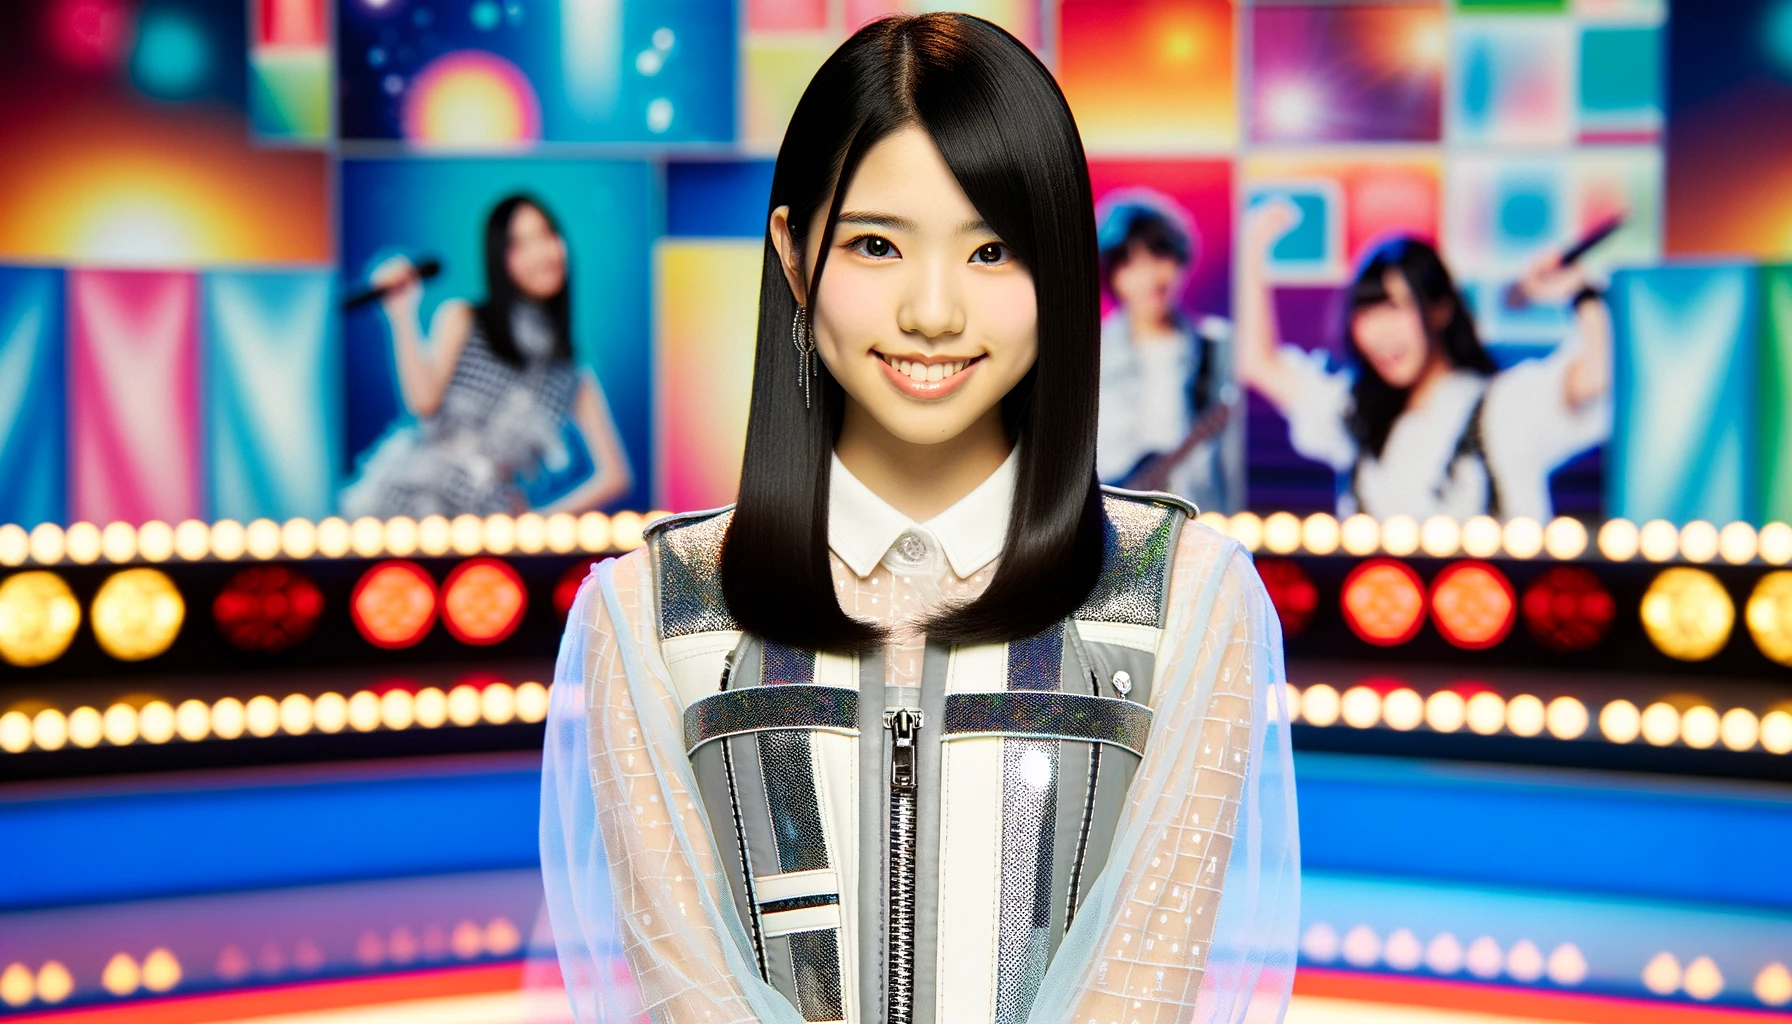 A young Japanese woman resembling a popular idol from a musical group, standing confidently with a radiant smile. She has long, straight black hair, a fair complexion, and is dressed in a trendy, stylish outfit suitable for a young pop star. The background is vibrant and colorful, suggesting a lively pop music atmosphere. The setting includes subtle hints of musical elements like microphones and stage lights, adding to the entertainment theme. The image should have a bright and energetic vibe, capturing the essence of a popular idol's charismatic presence.